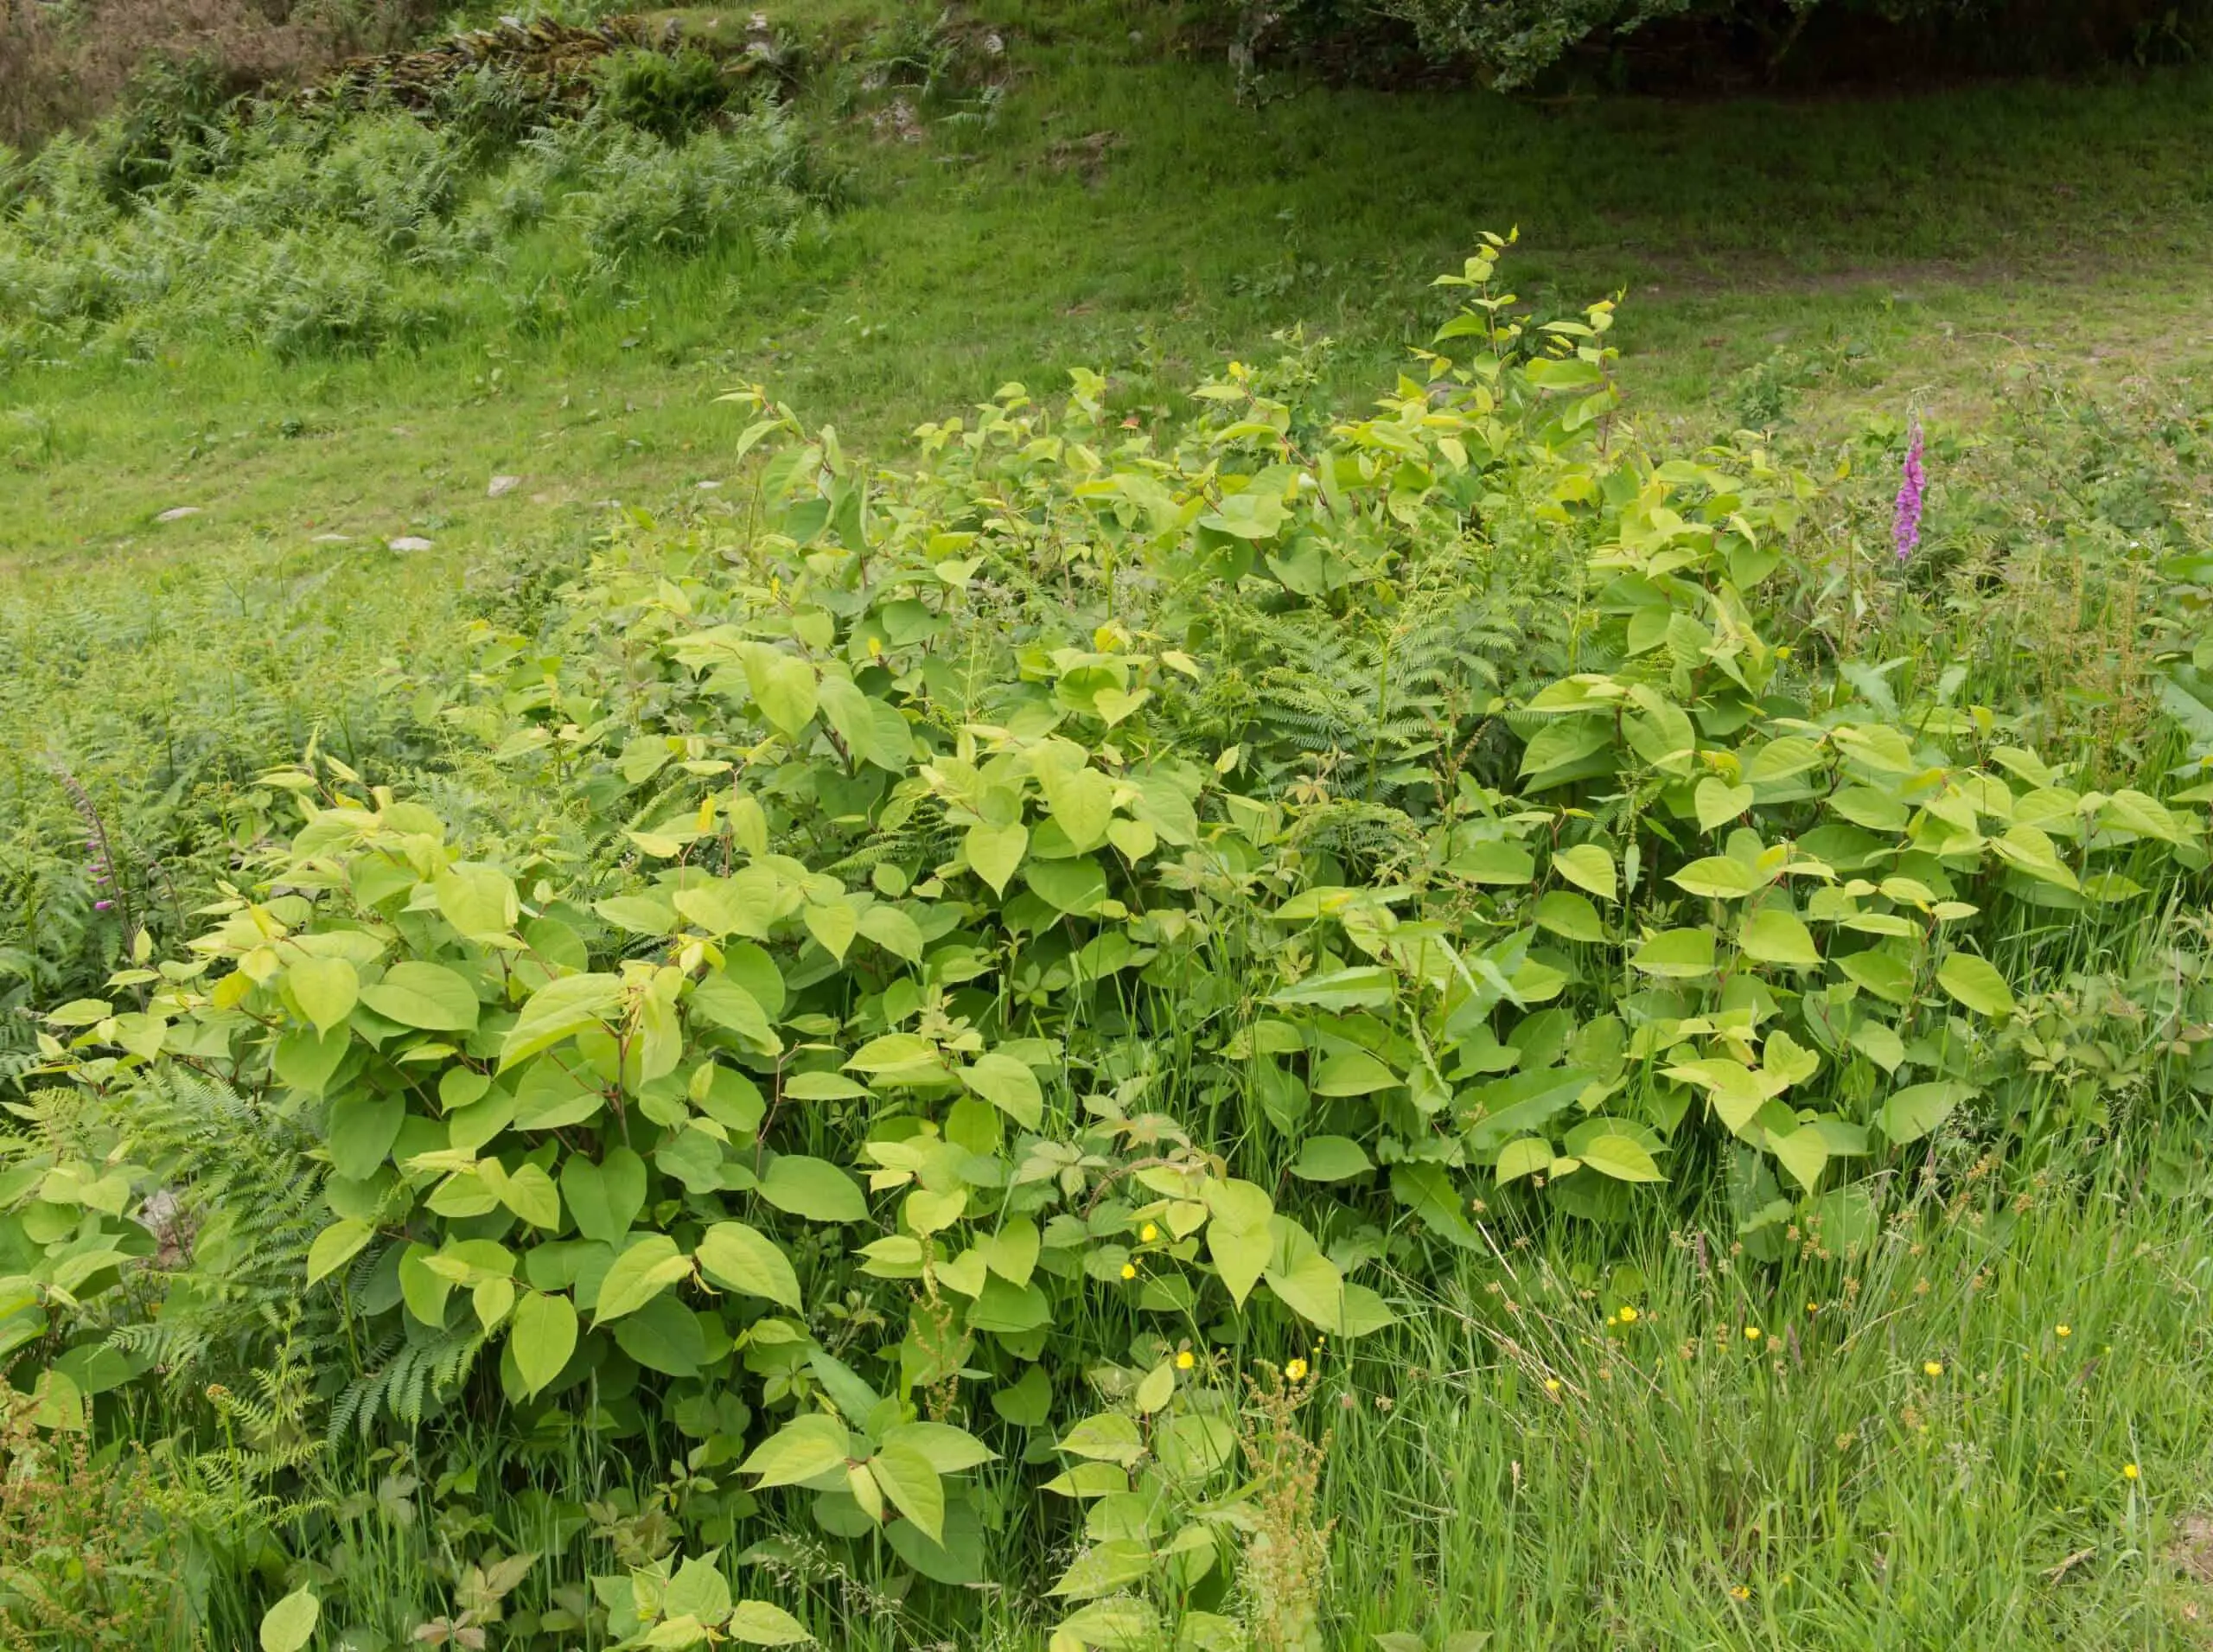 Japanese knotweed in April begins spreading and growing aggressively within any property